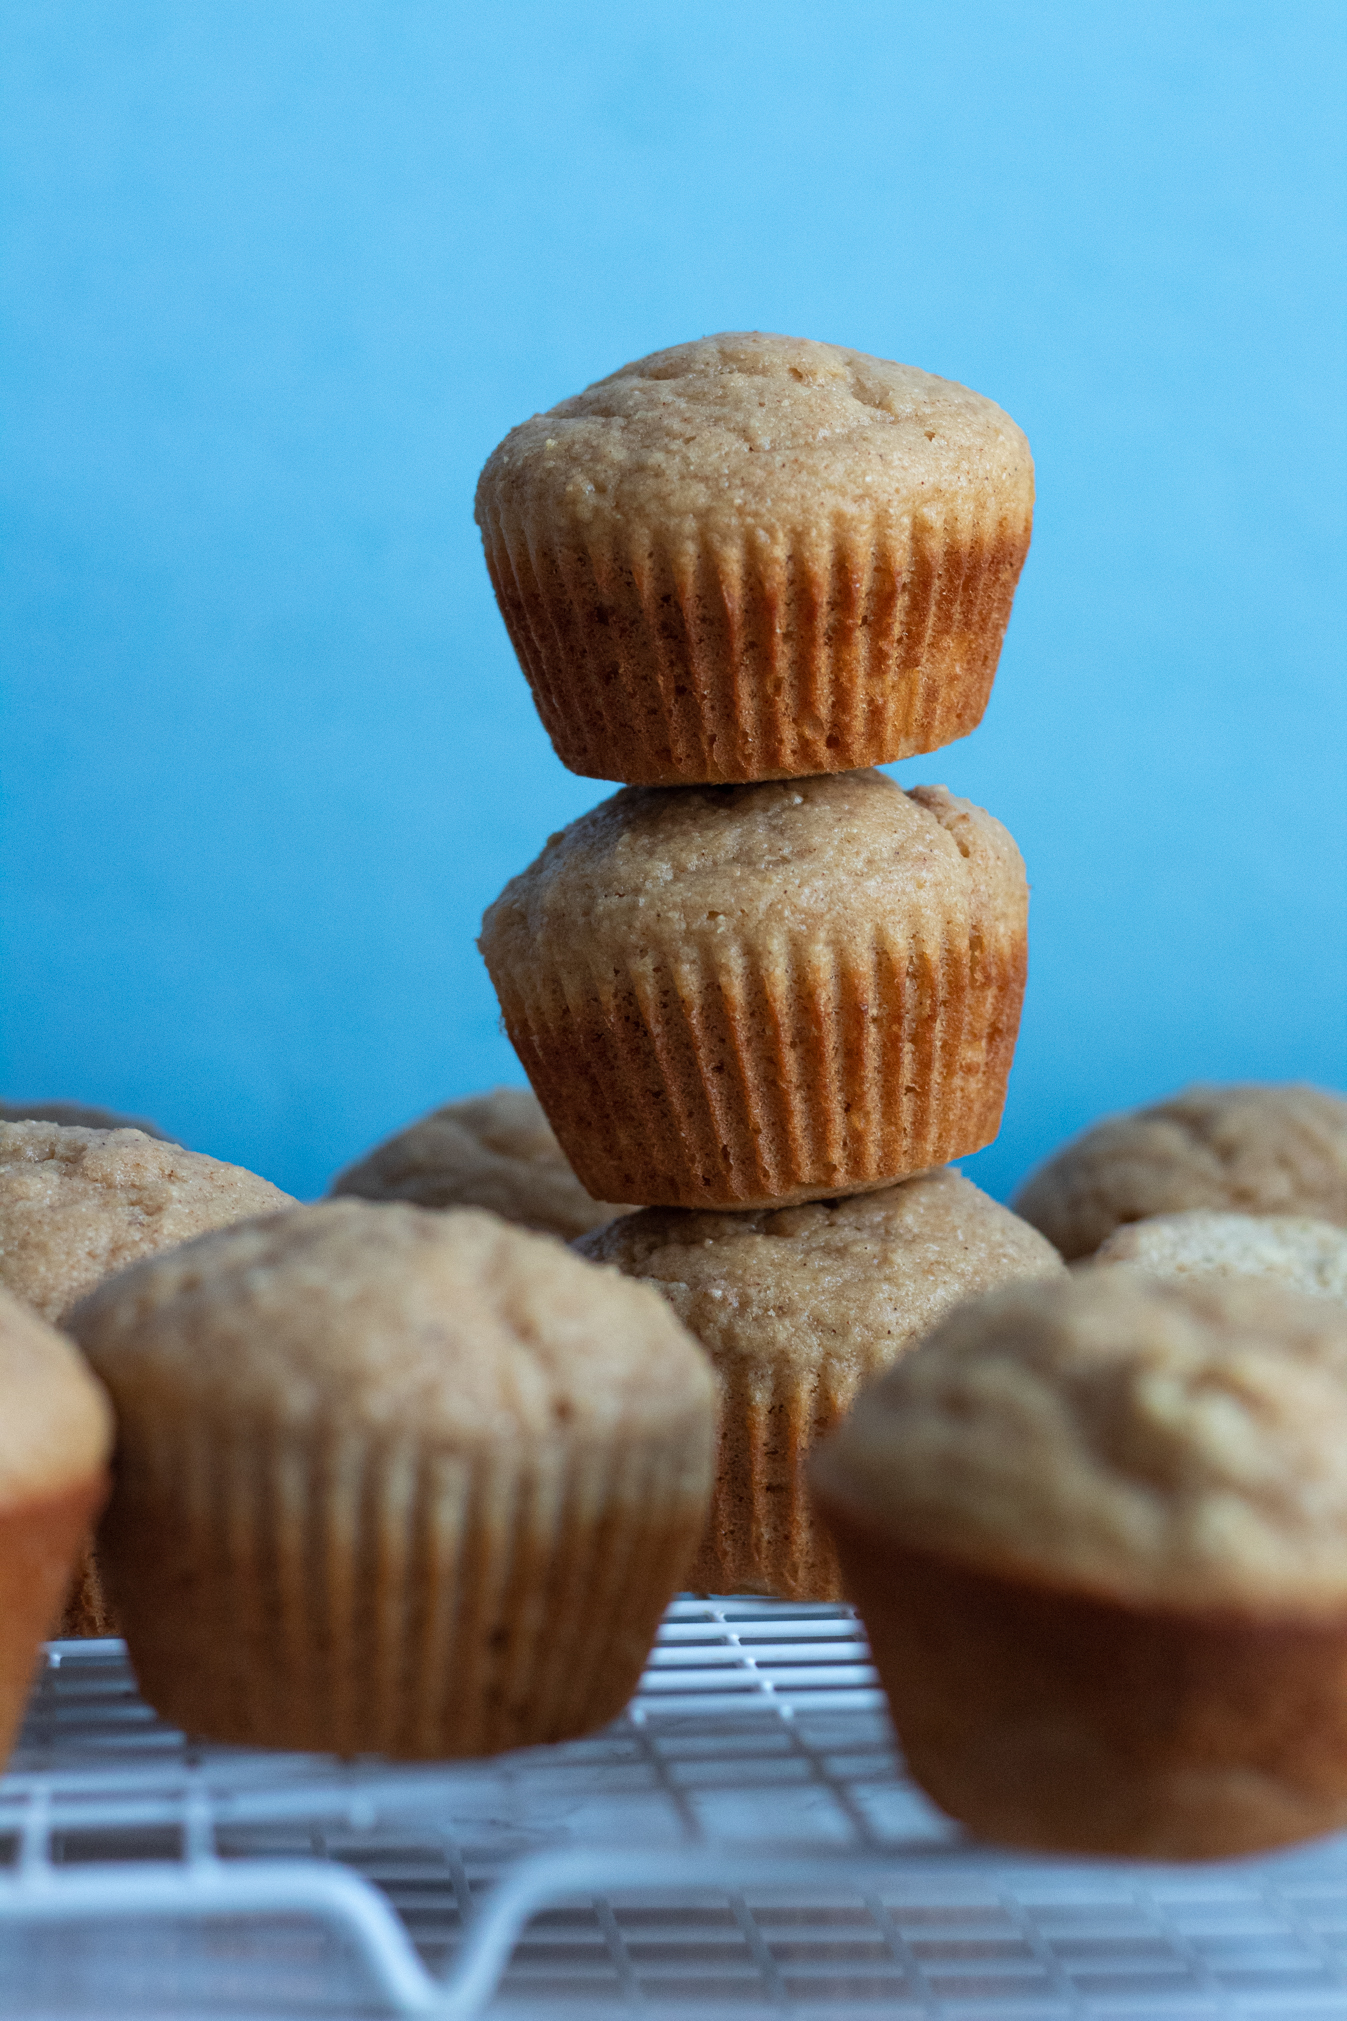 Kodiak Cakes Muffin Recipe (without banana) - Mindy's Cooking Obsession